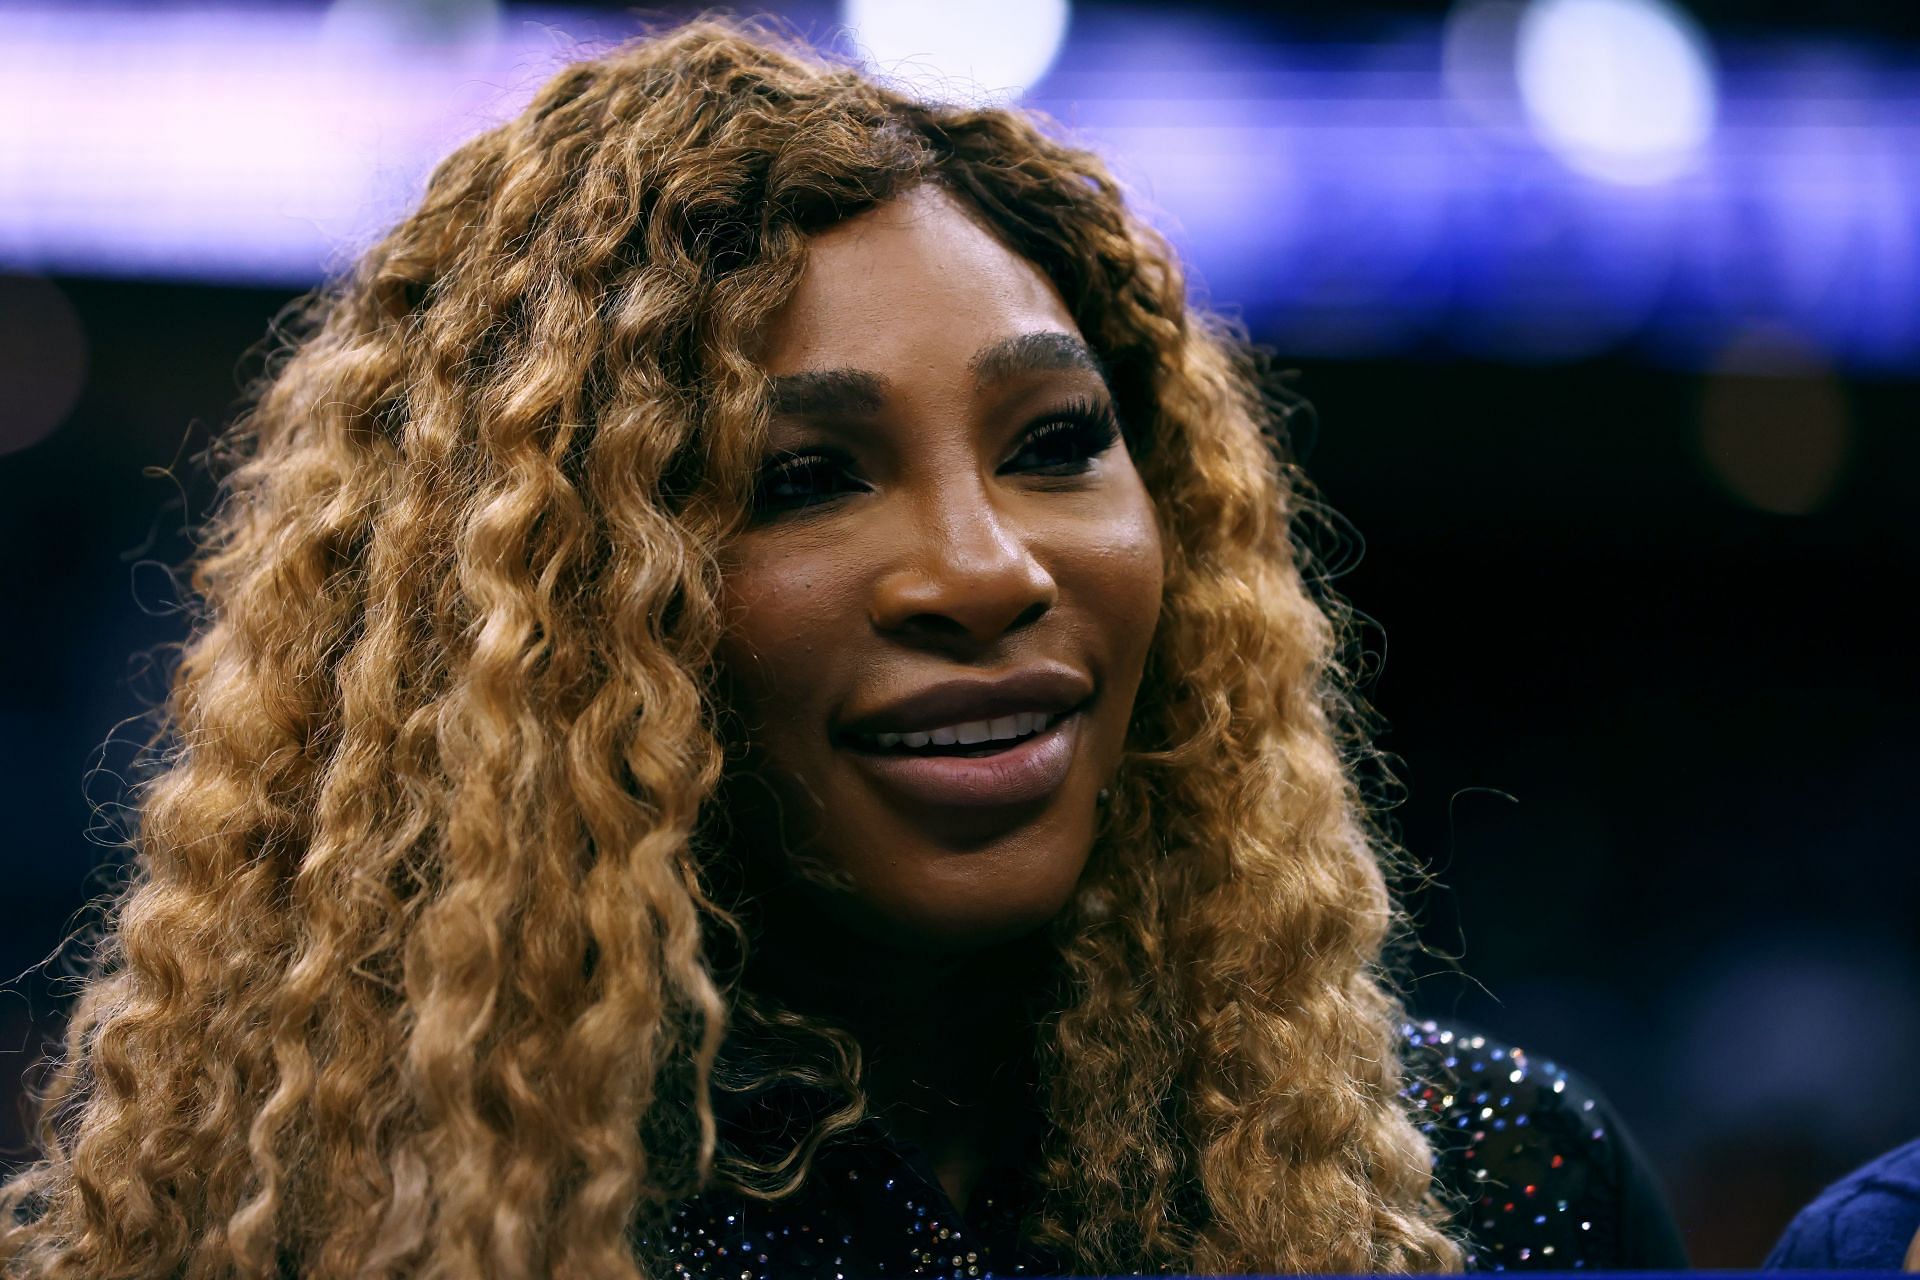 Serena Williams has been an advocate for several social causes off the tennis court